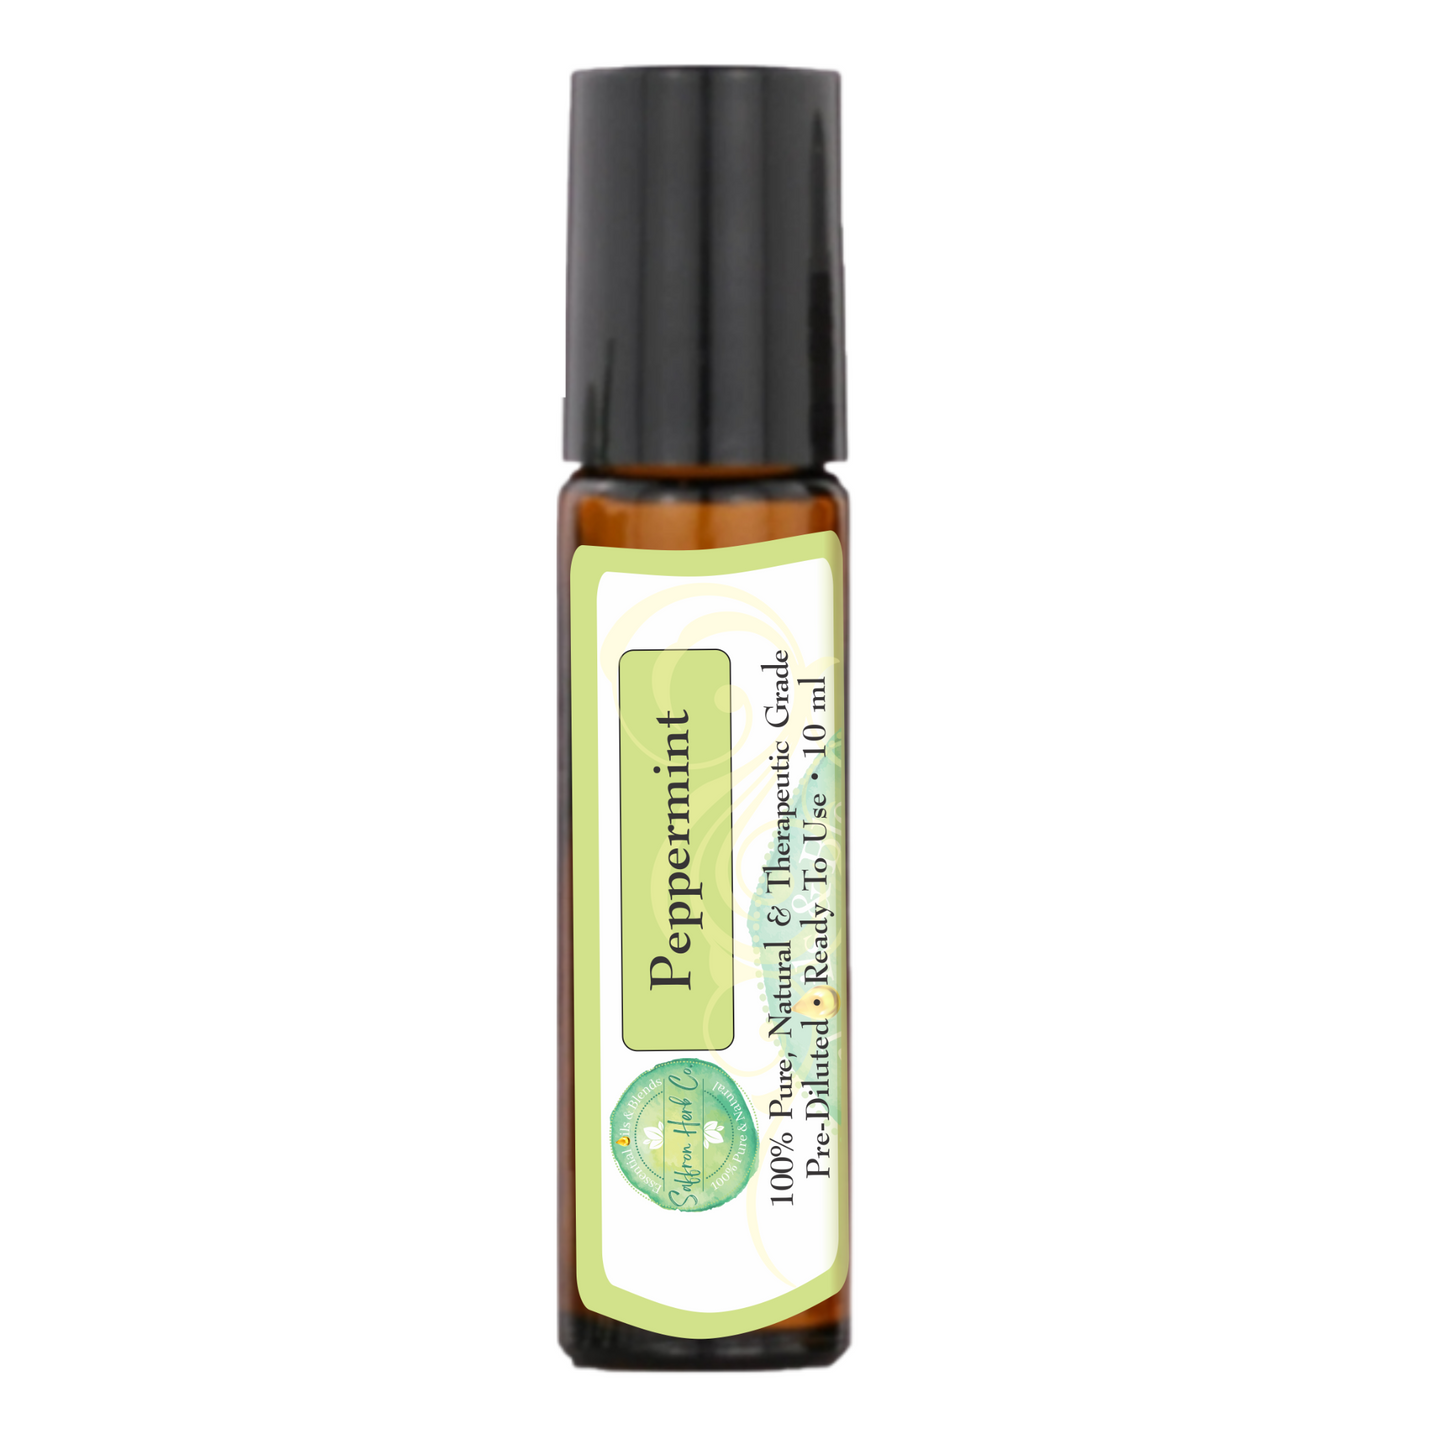 Peppermint Essential Oil Roller Bottle Blend • 100% Pure & Natural • Pre-Diluted • Ready To Use